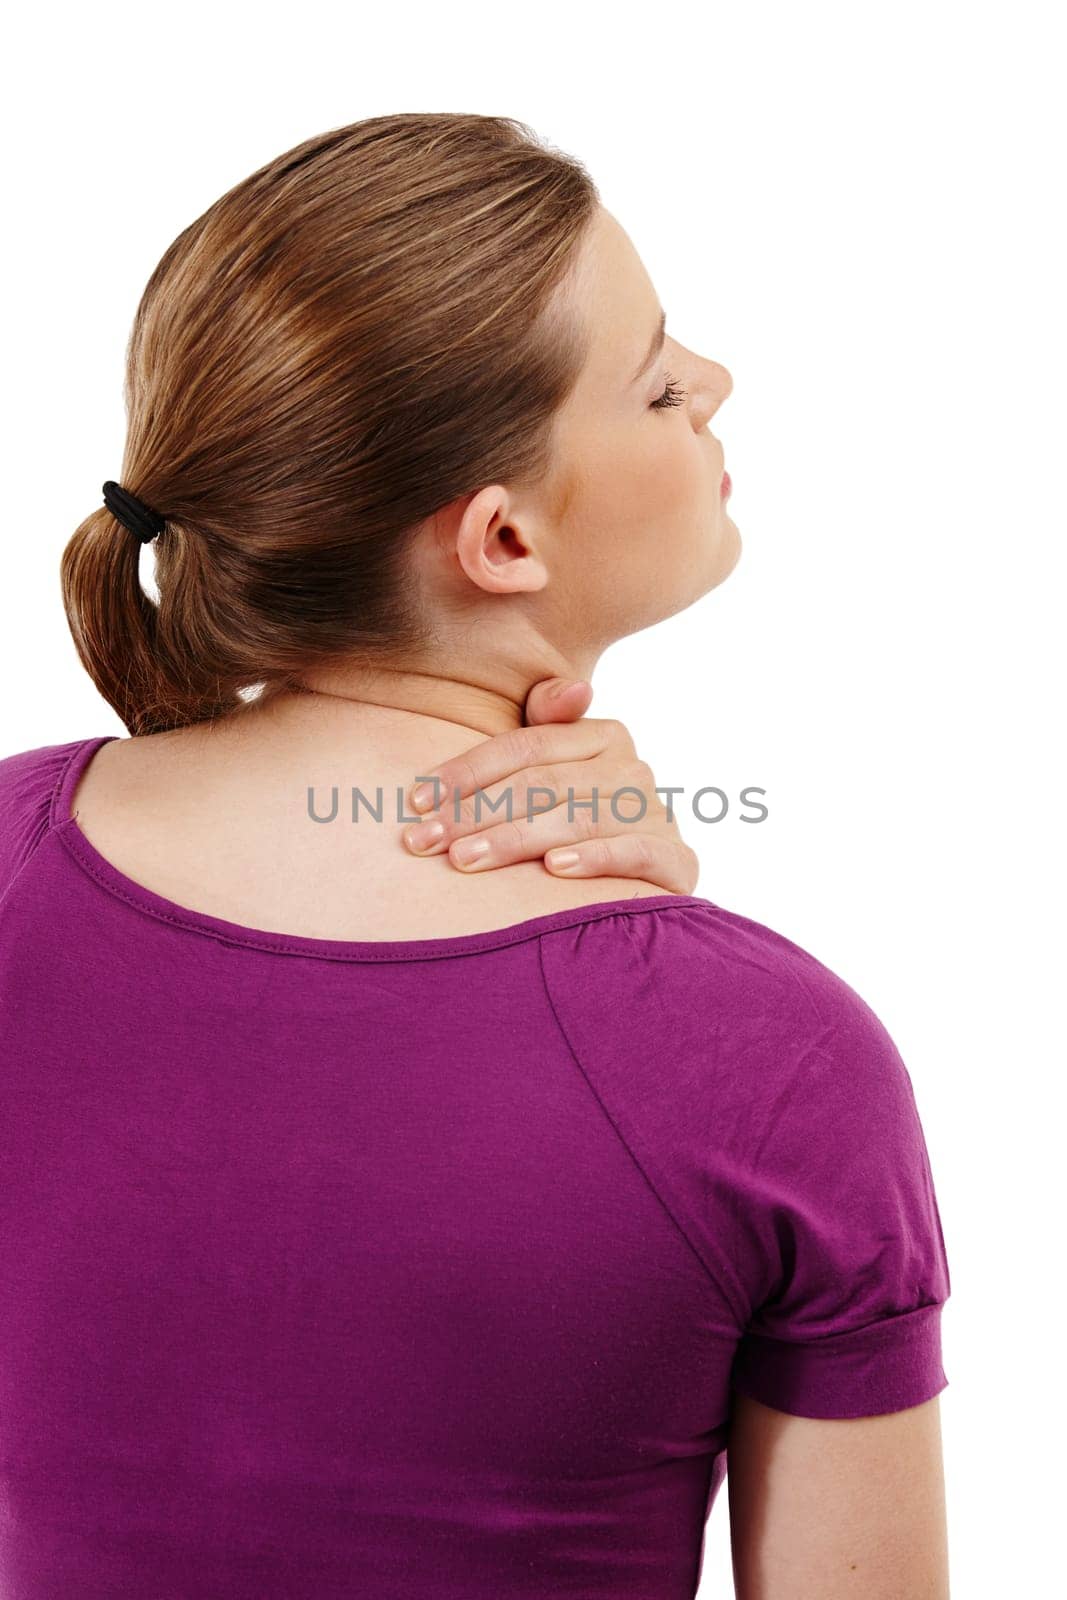 Neck pain, stress and girl in studio with anatomy, emergency and joint inflammation on white background. Shoulder, injury or gen z student with burnout risk, muscle or bone crisis, ache and disaster.